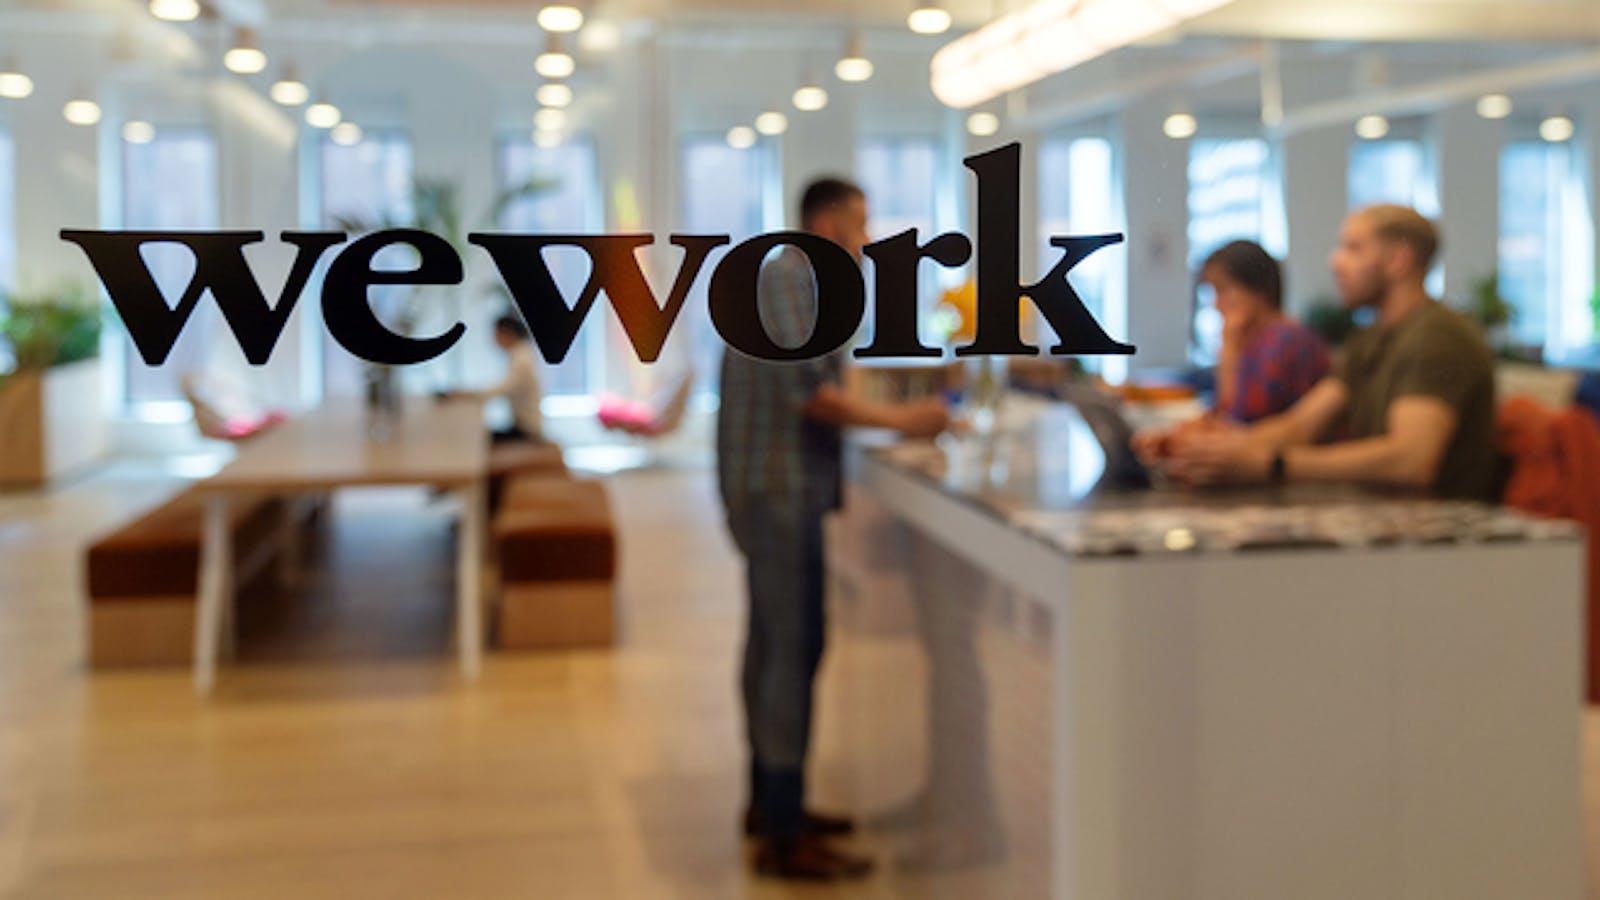 A WeWork location in New York City. Photo: Bloomberg